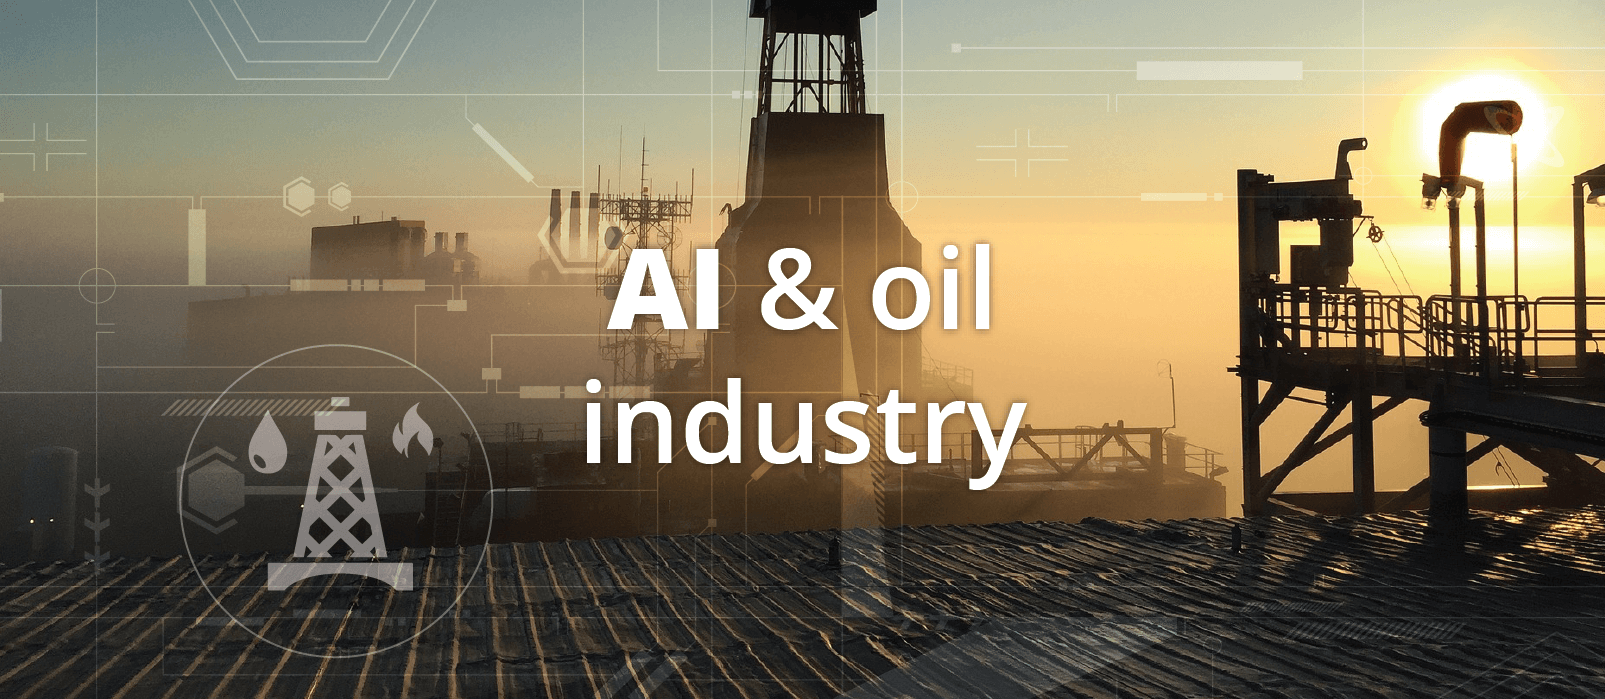 Restb Image Recognition Technology To Innovate In The Oil Industry